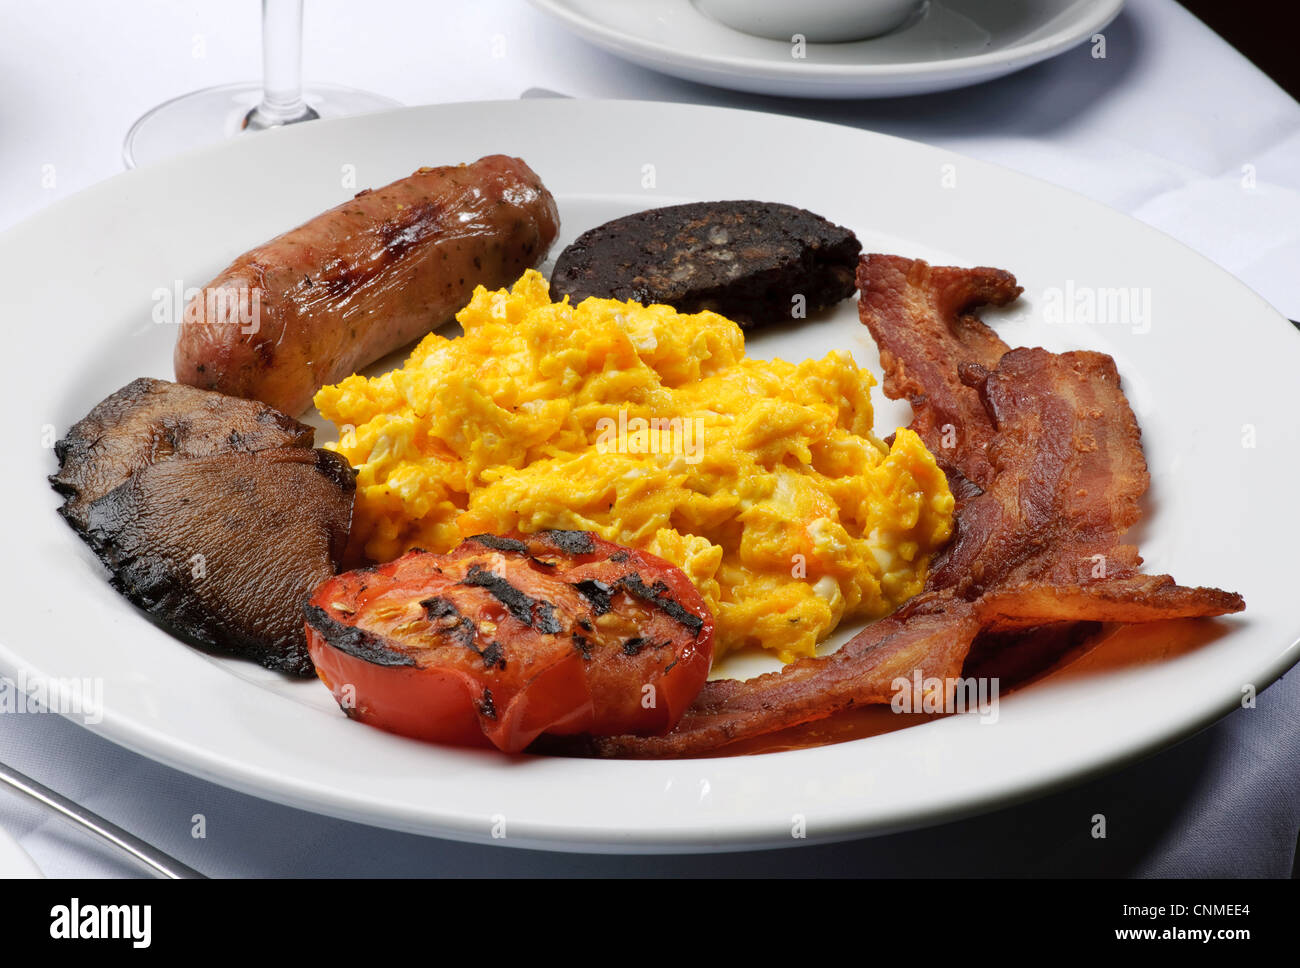 full english breakfast bacon and eggs fry-up in restaurant healthy unhealthy Stock Photo